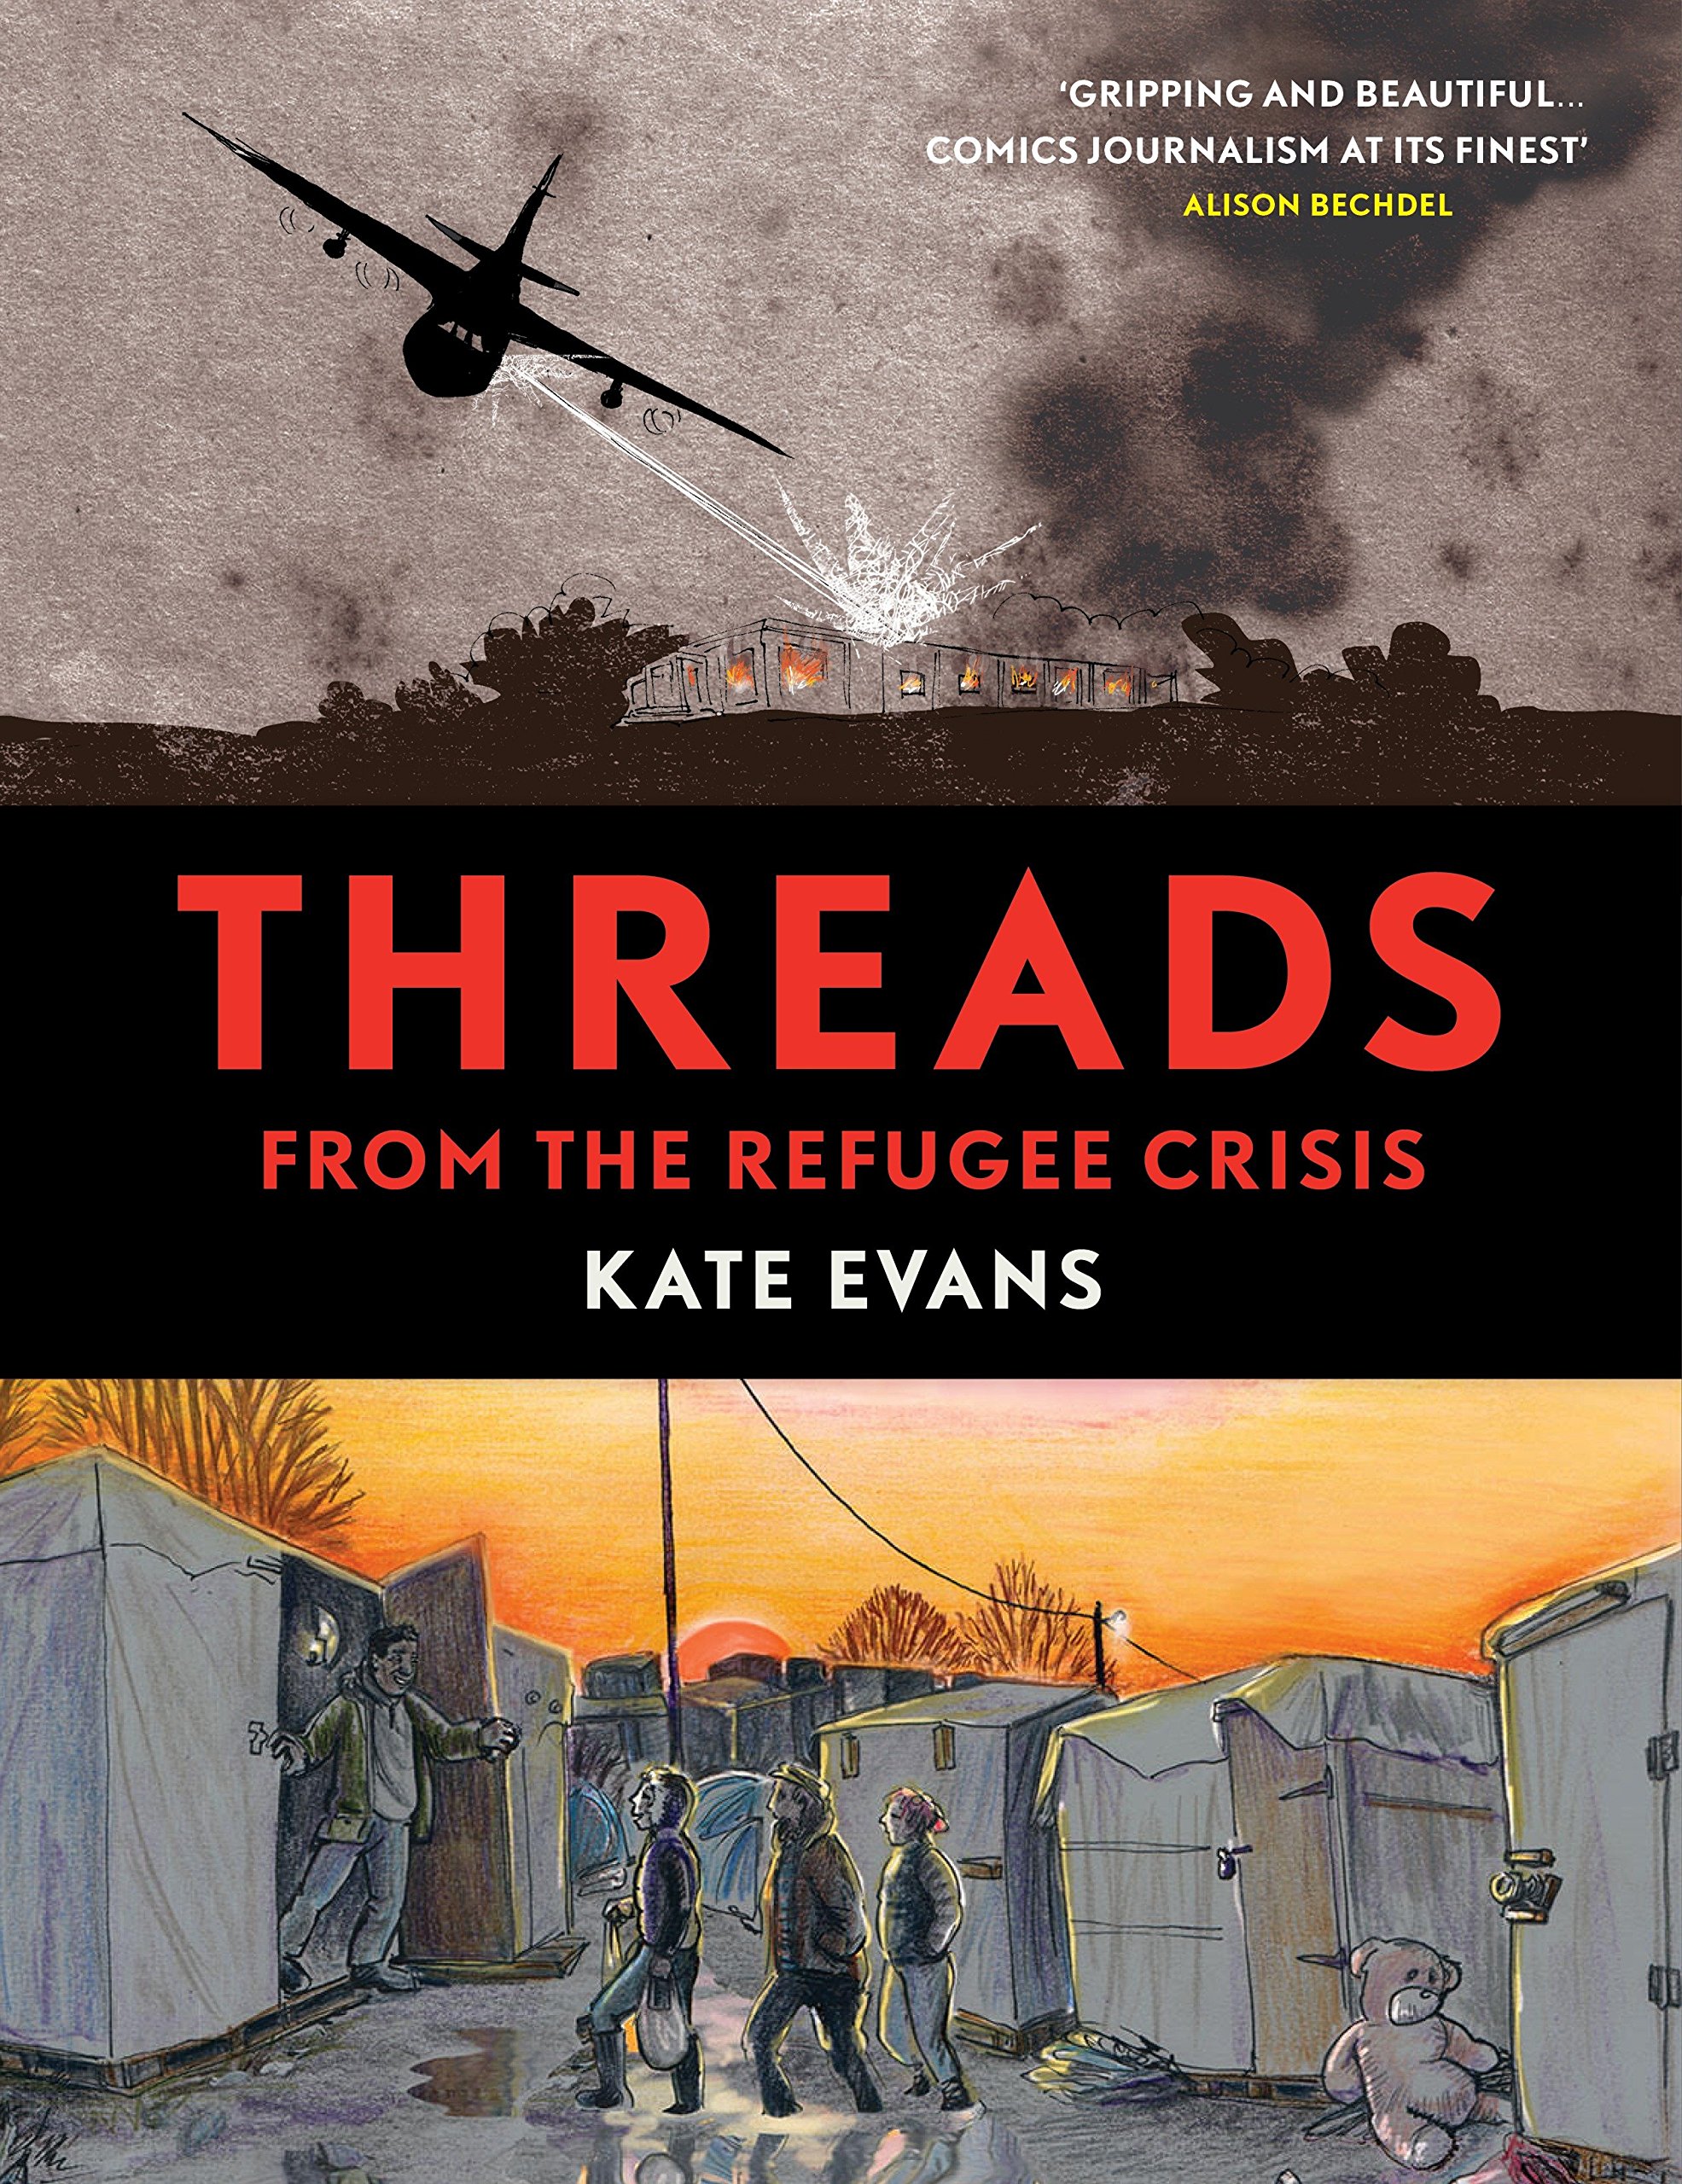 Threads: From the Refugee Crisis by Kate Evans book cover